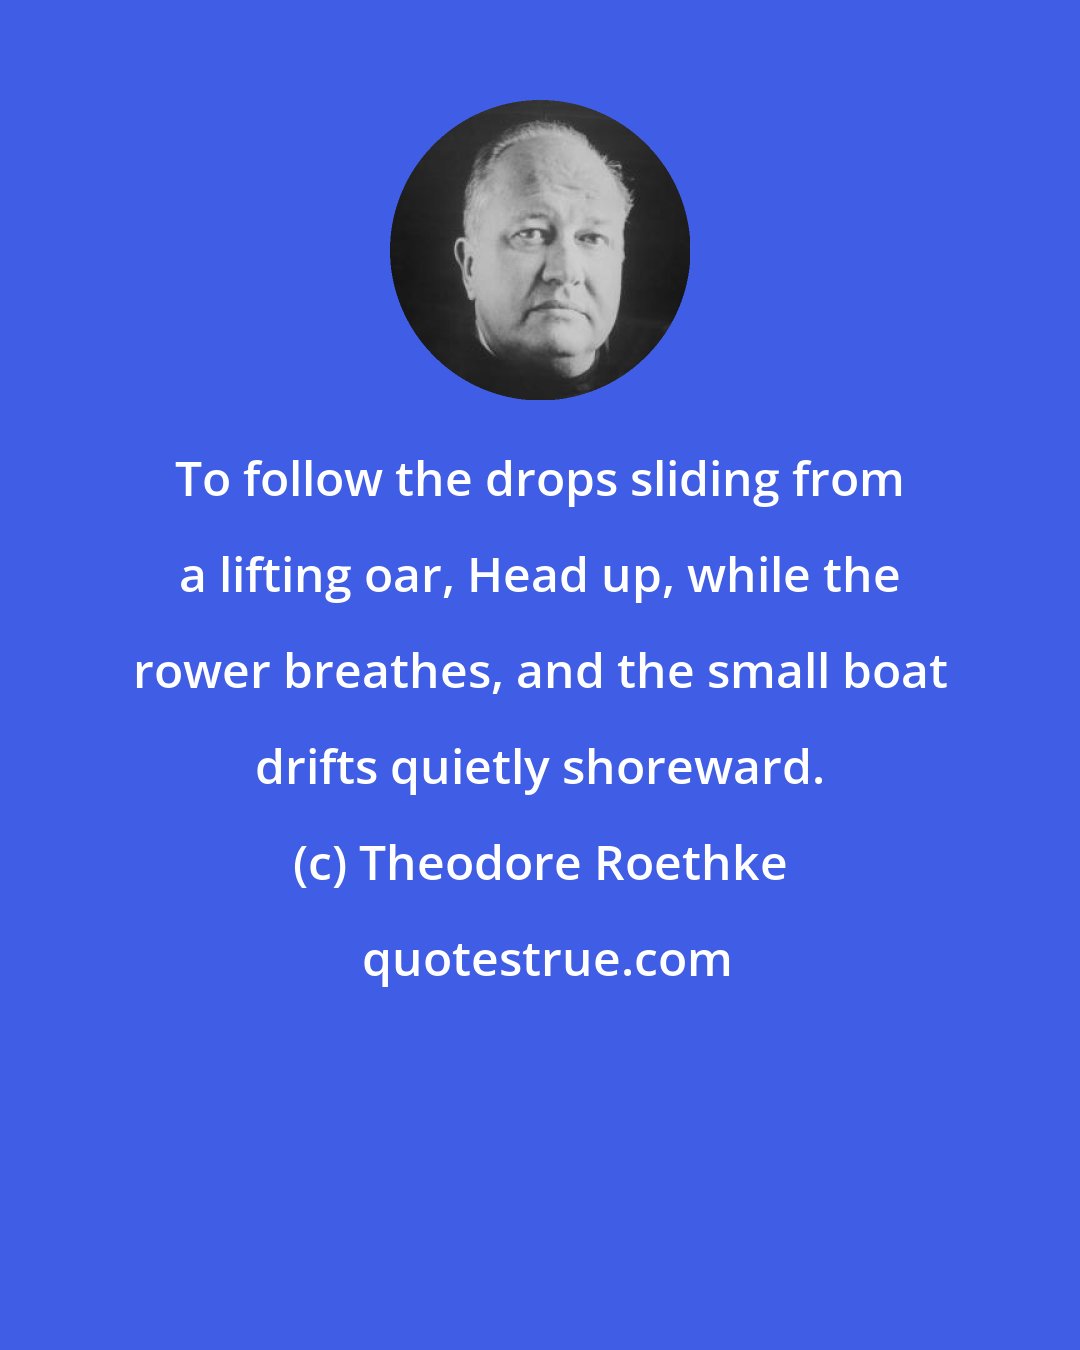 Theodore Roethke: To follow the drops sliding from a lifting oar, Head up, while the rower breathes, and the small boat drifts quietly shoreward.